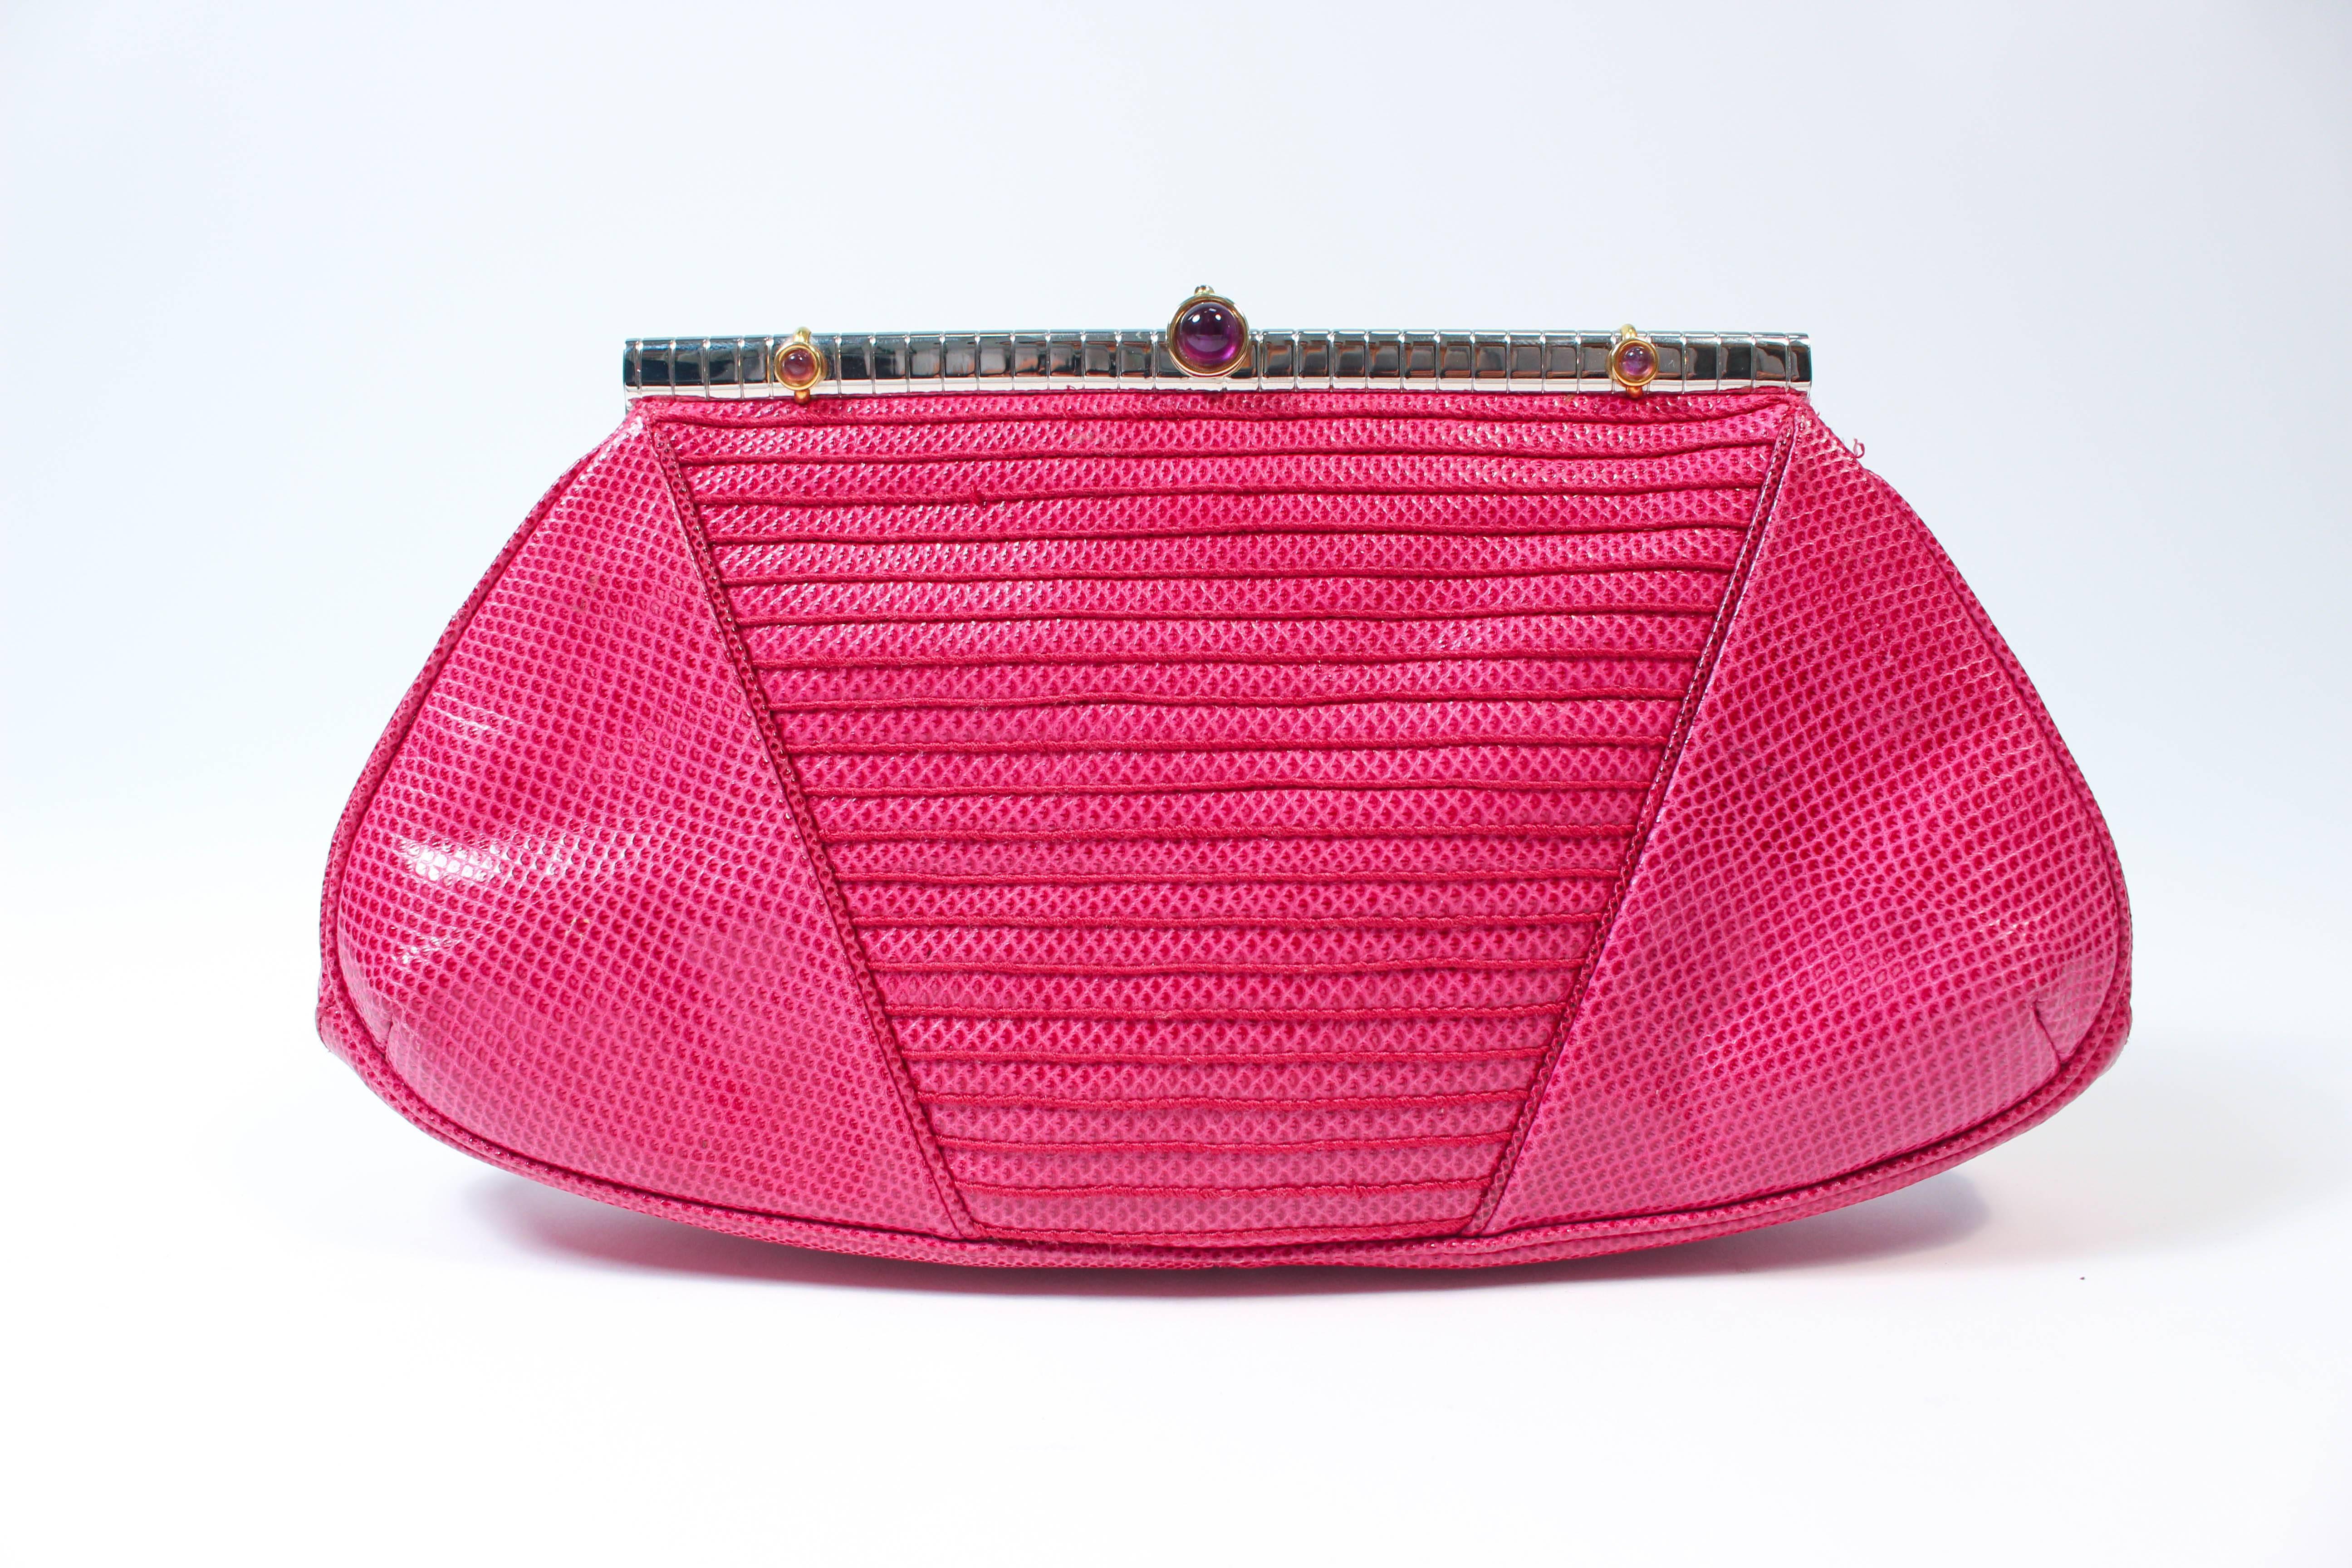 This  Judith Leiber vintage purse is composed of a magenta pink lizard skin, Features a frame style with optional chain strap which can be worn as a cross-body and clutch. There is an interior zipper compartment. In excellent vintage condition comes